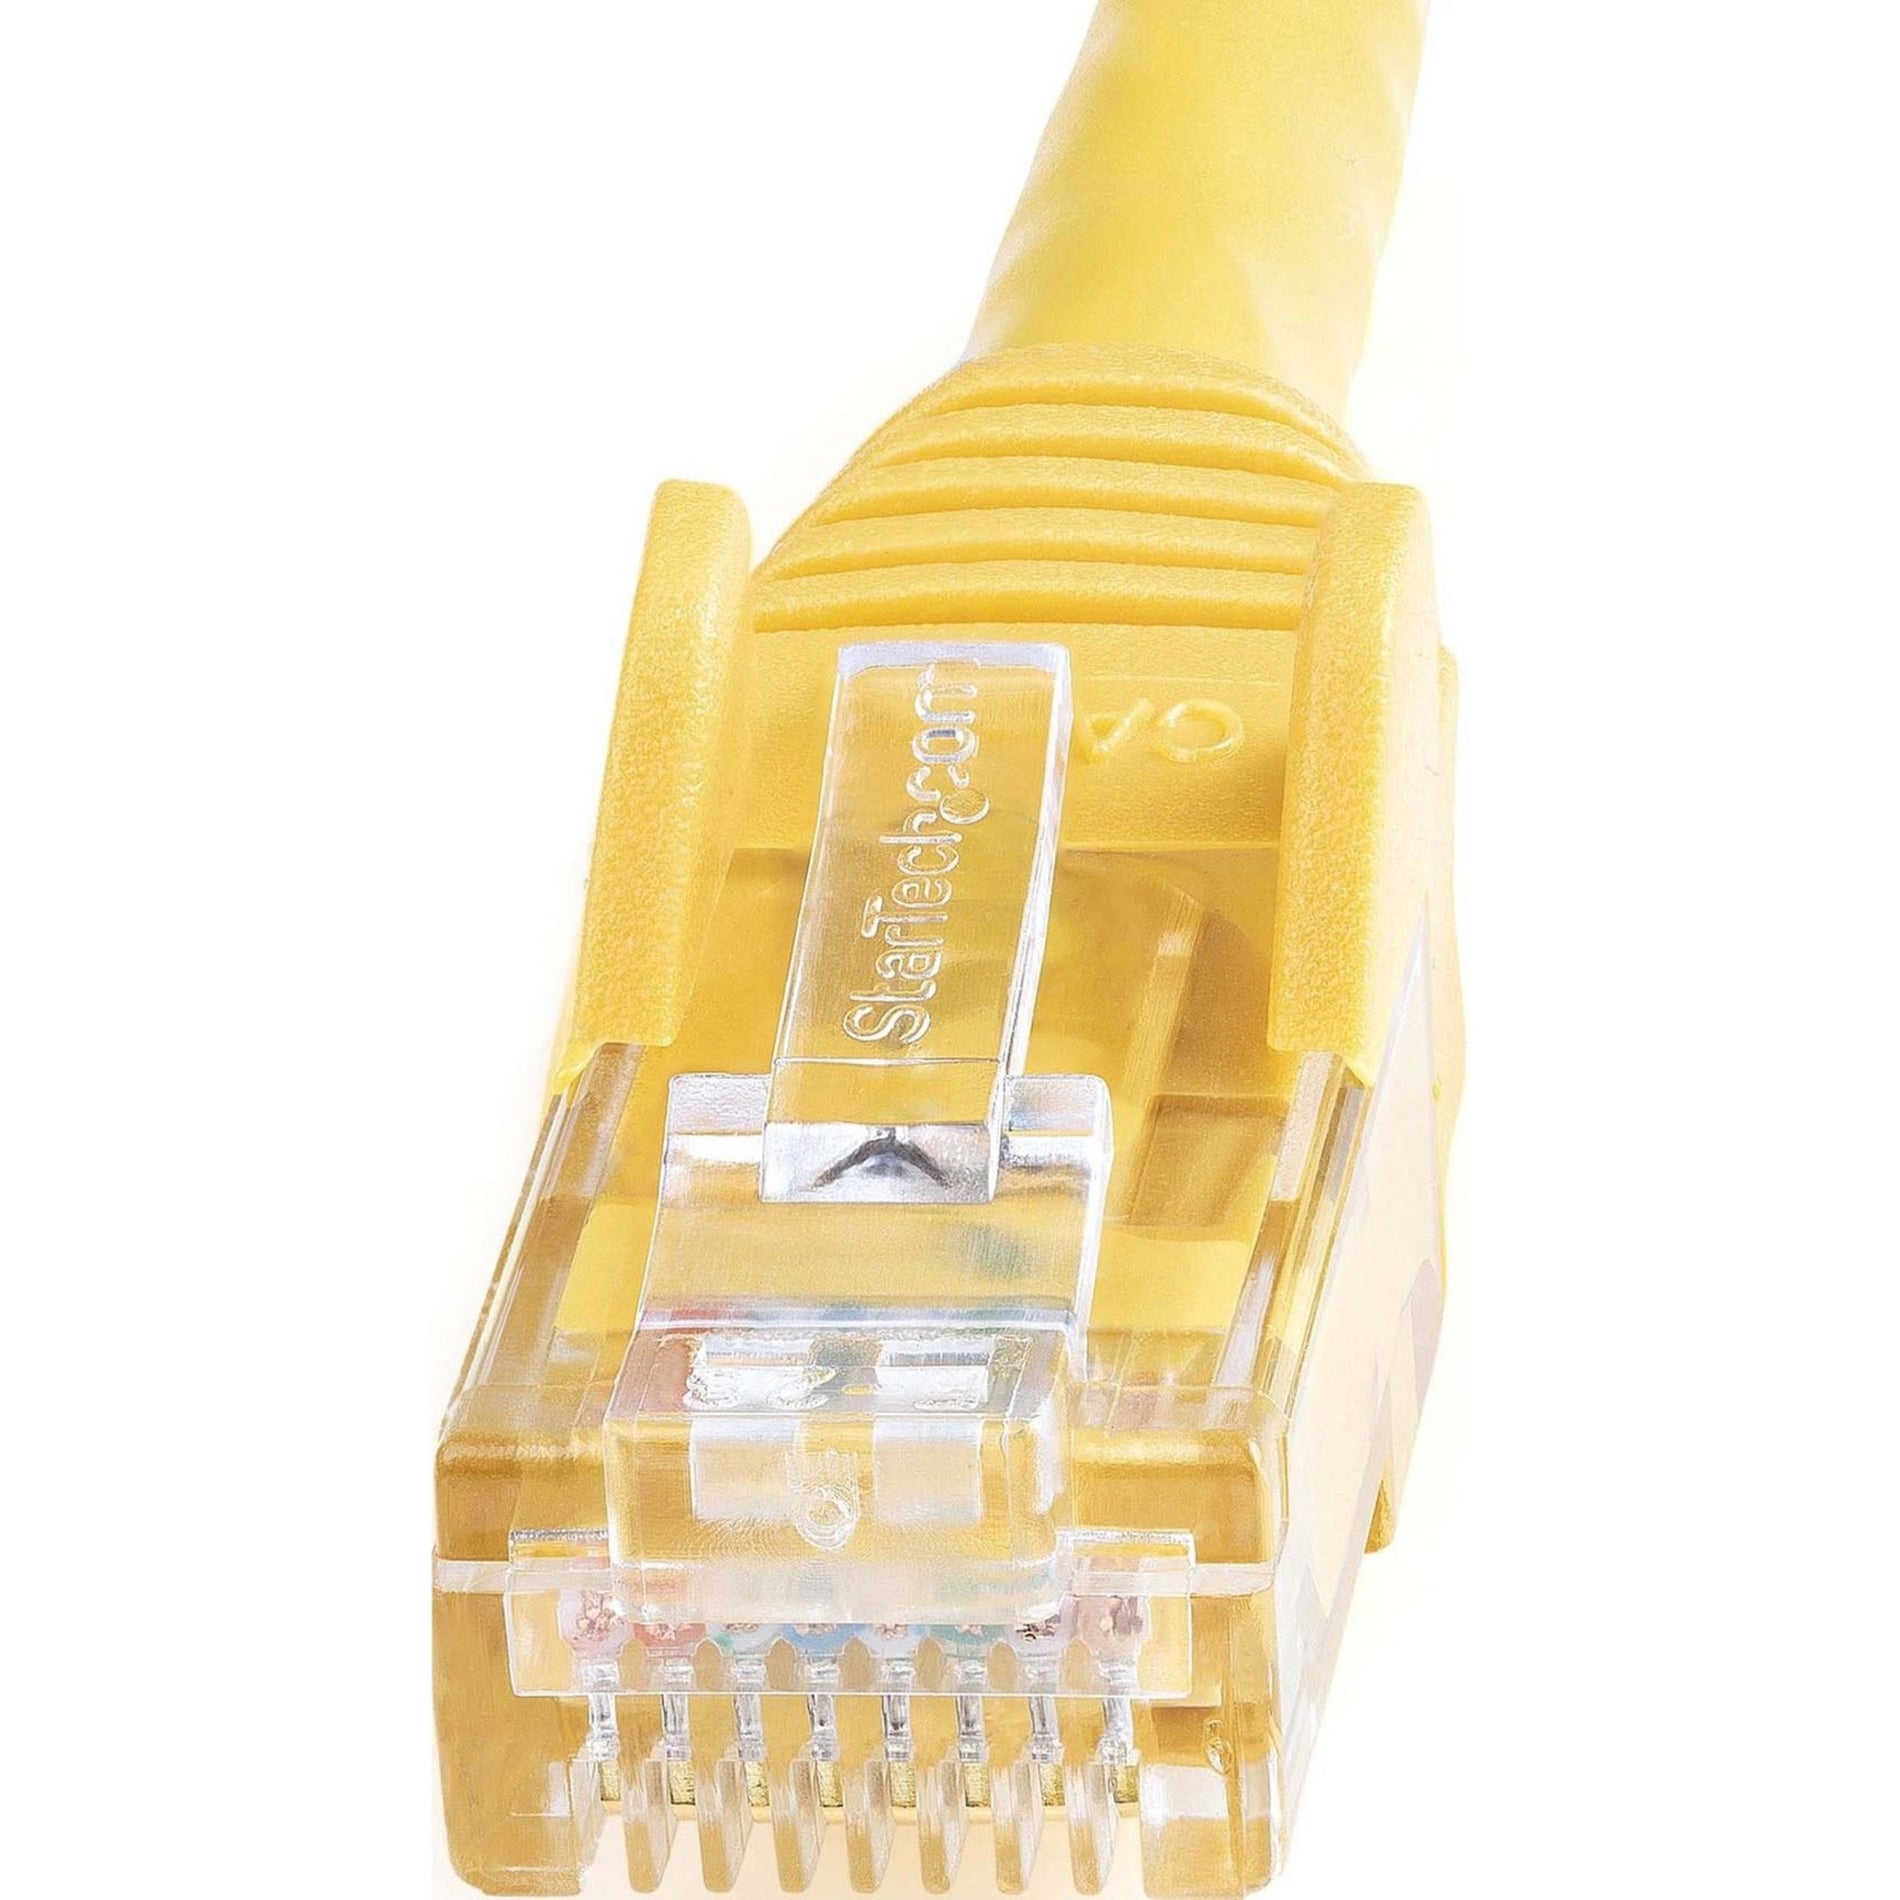 StarTech.com N6PATCH20YL Cat. 6 Network Cable, 20ft Yellow Ethernet Cable, Snagless RJ45 Connectors